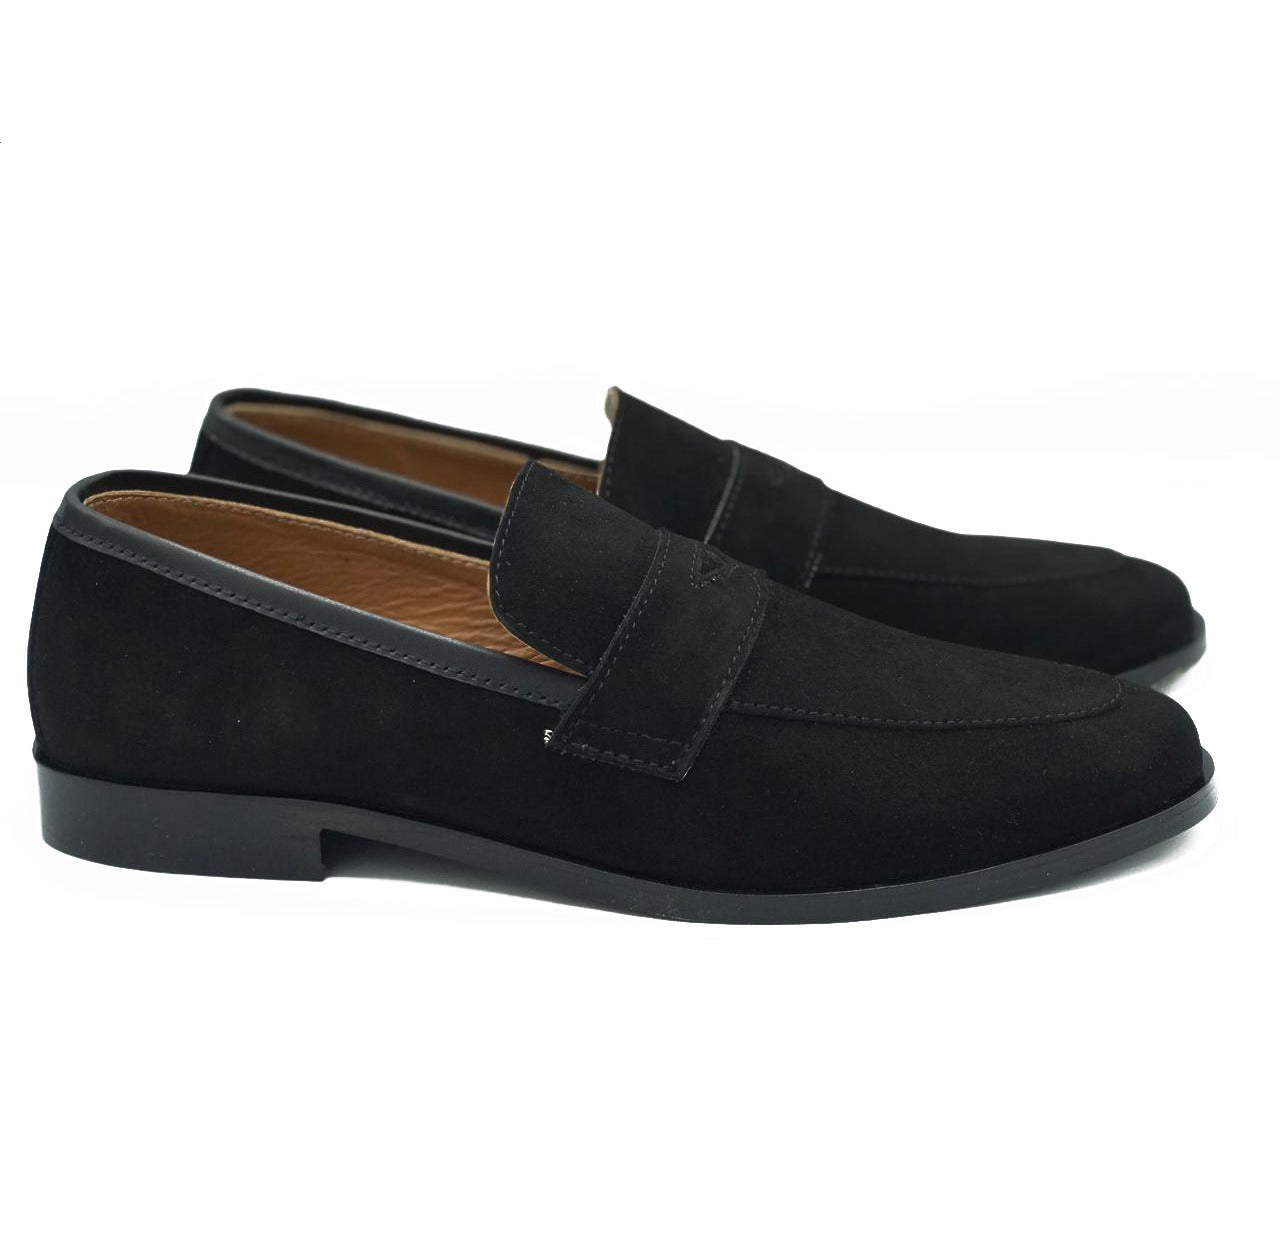 5002-Black Suede Cow Leather Formal Loafer Style